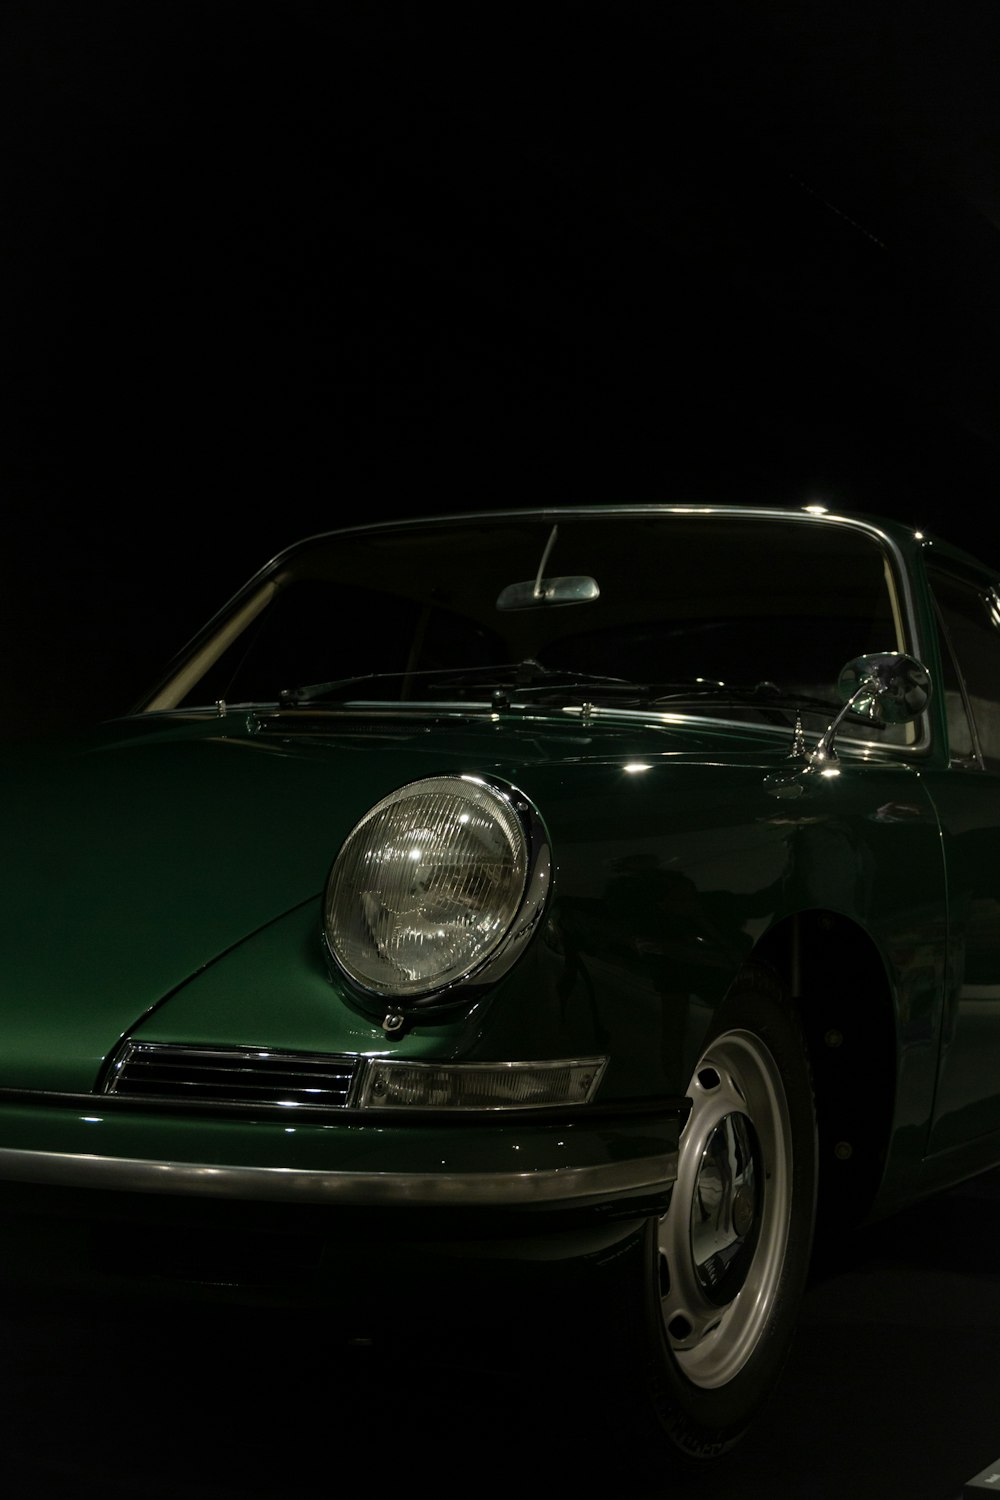 a green car parked in a dark room